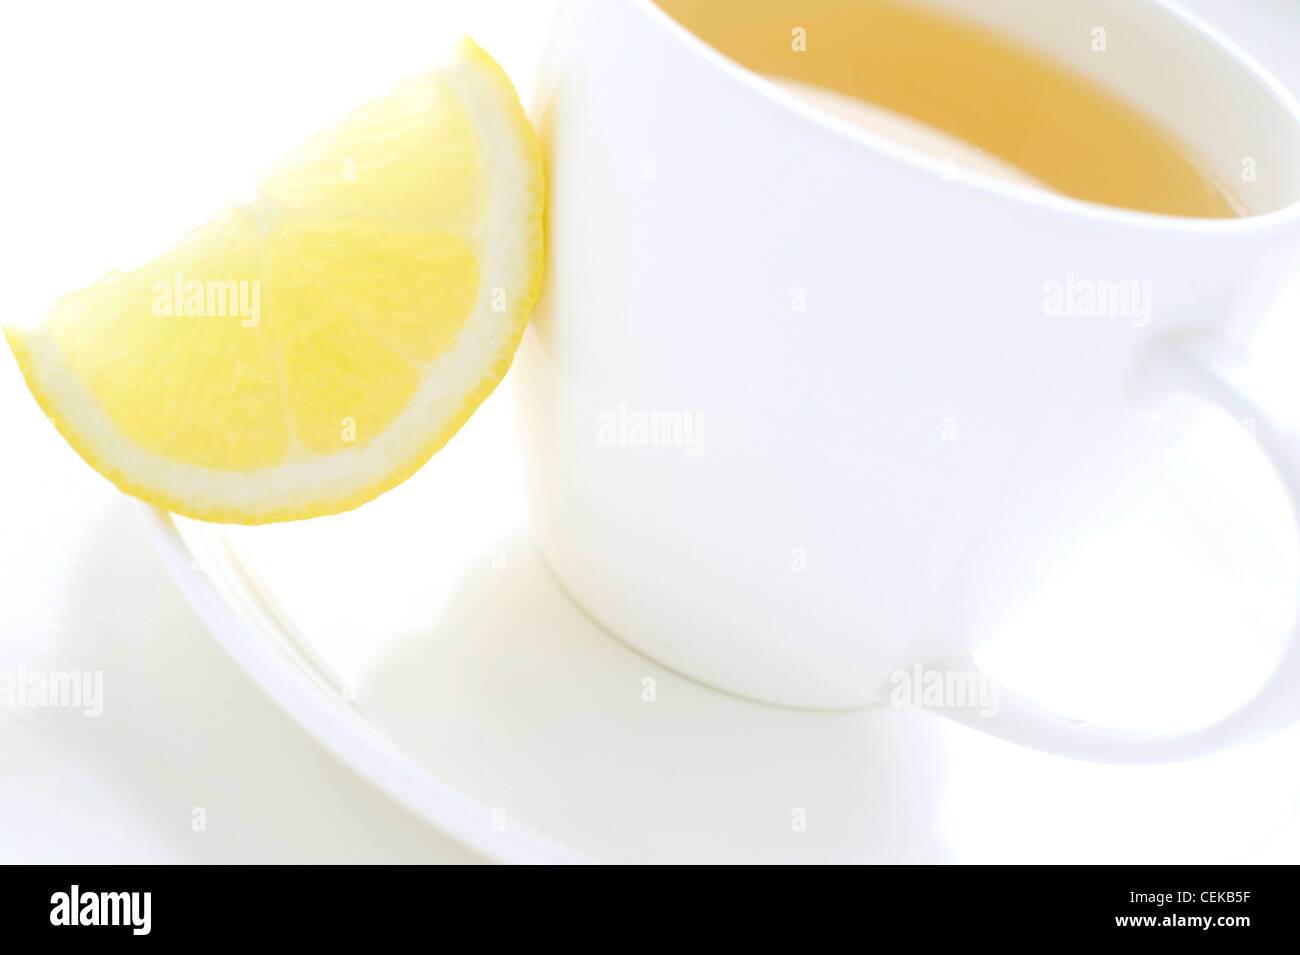 A close up of a white cup and saucer filled with a yellow fruit tea, with a slice of lemon on one side Stock Photo